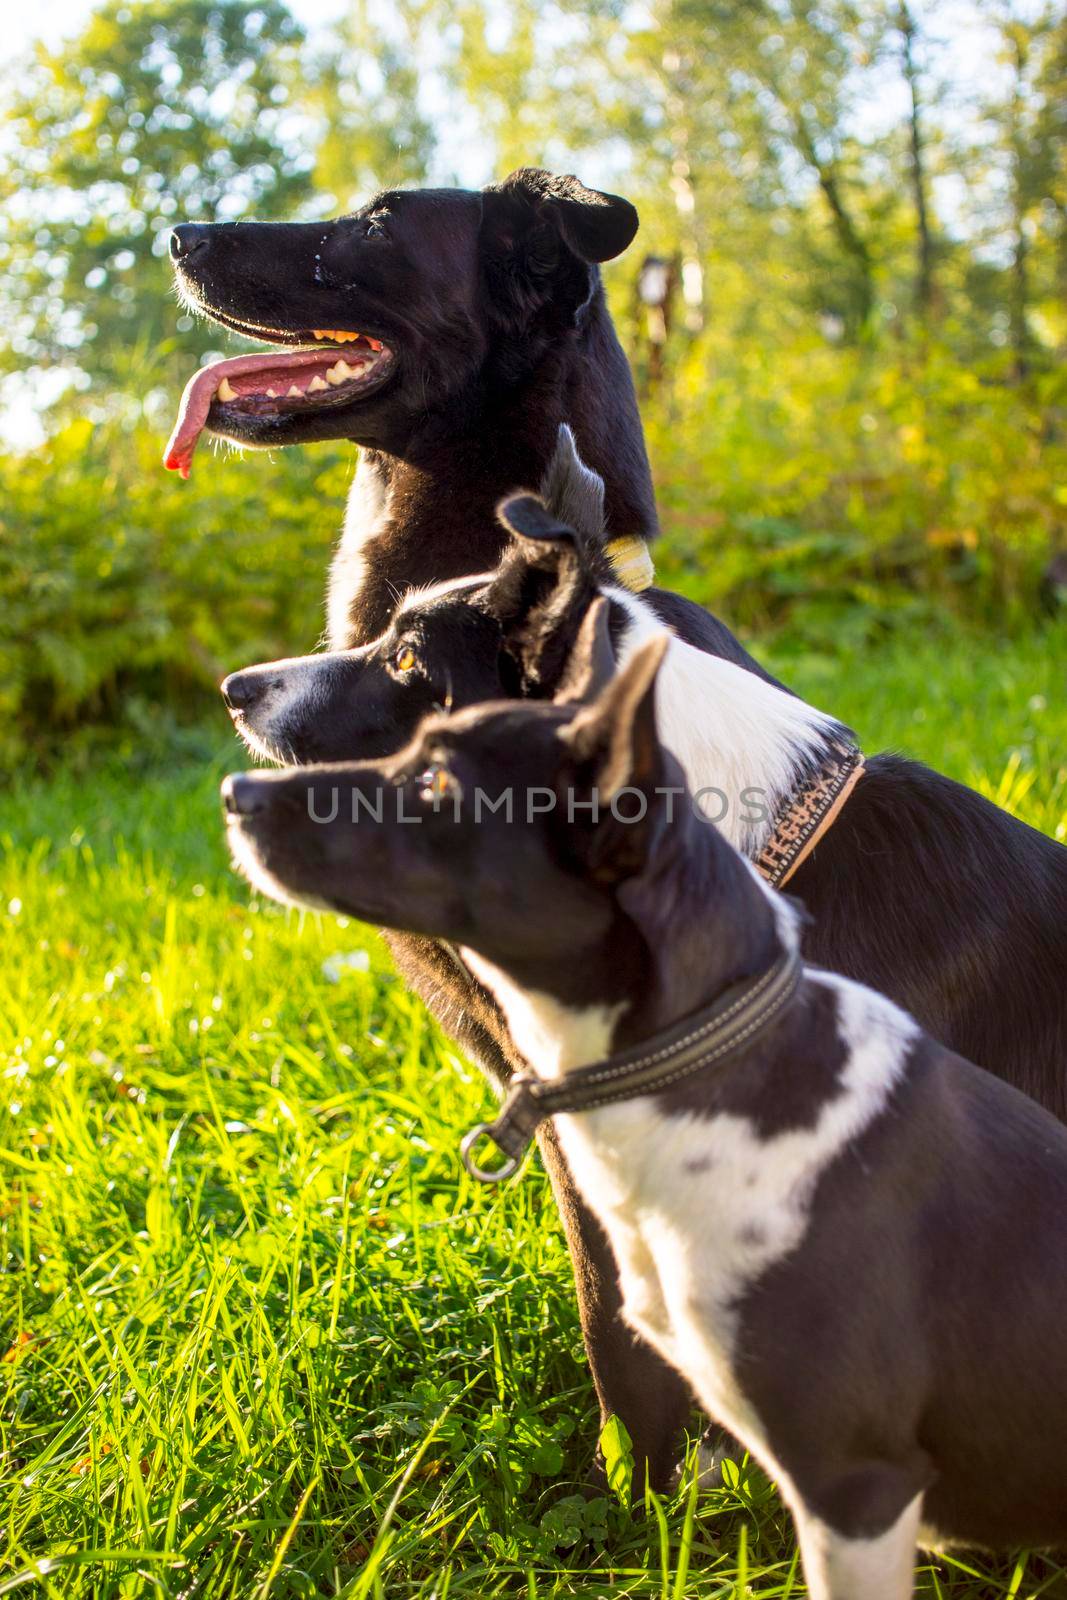 head shot of three white and black dogs of blurry green background. Side profile view. Group side view portrait of dog of different breeds